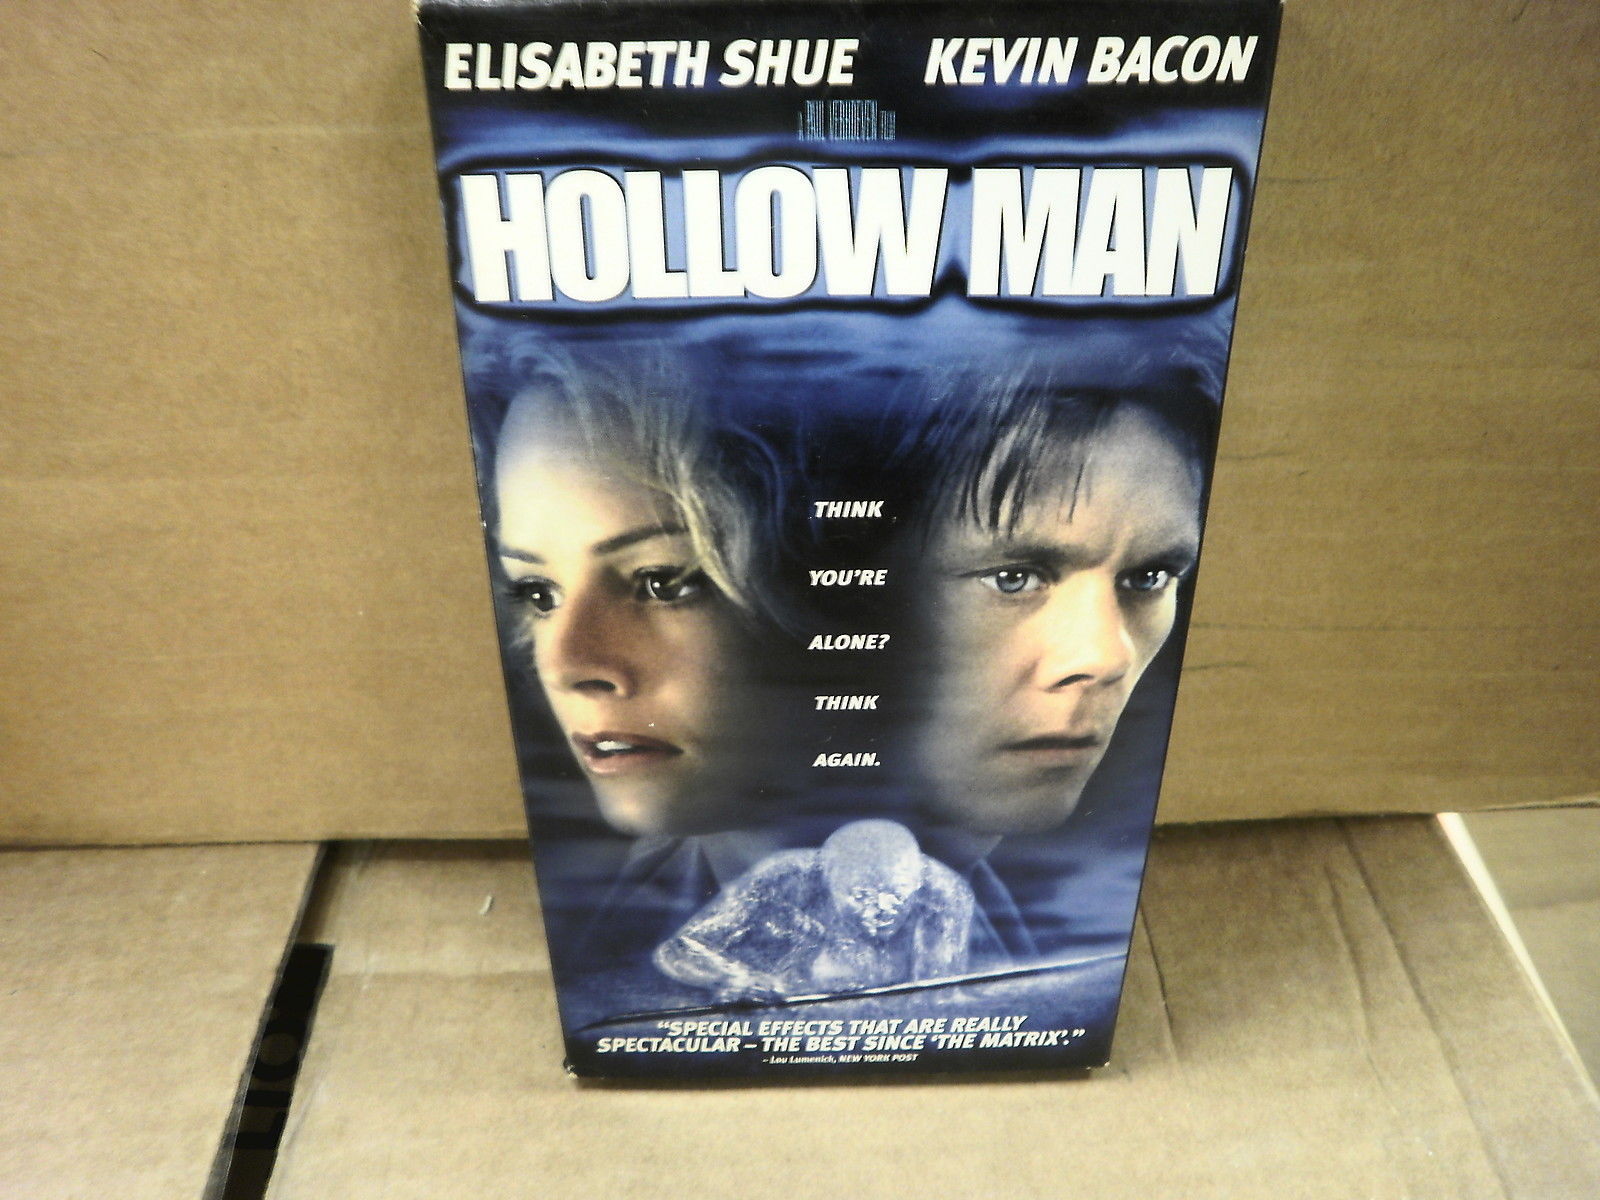 L81 HOLLOW MAN ELISABETH SHUE COLUMBIA 2000 USED VHS TAPE - VHS Tapes